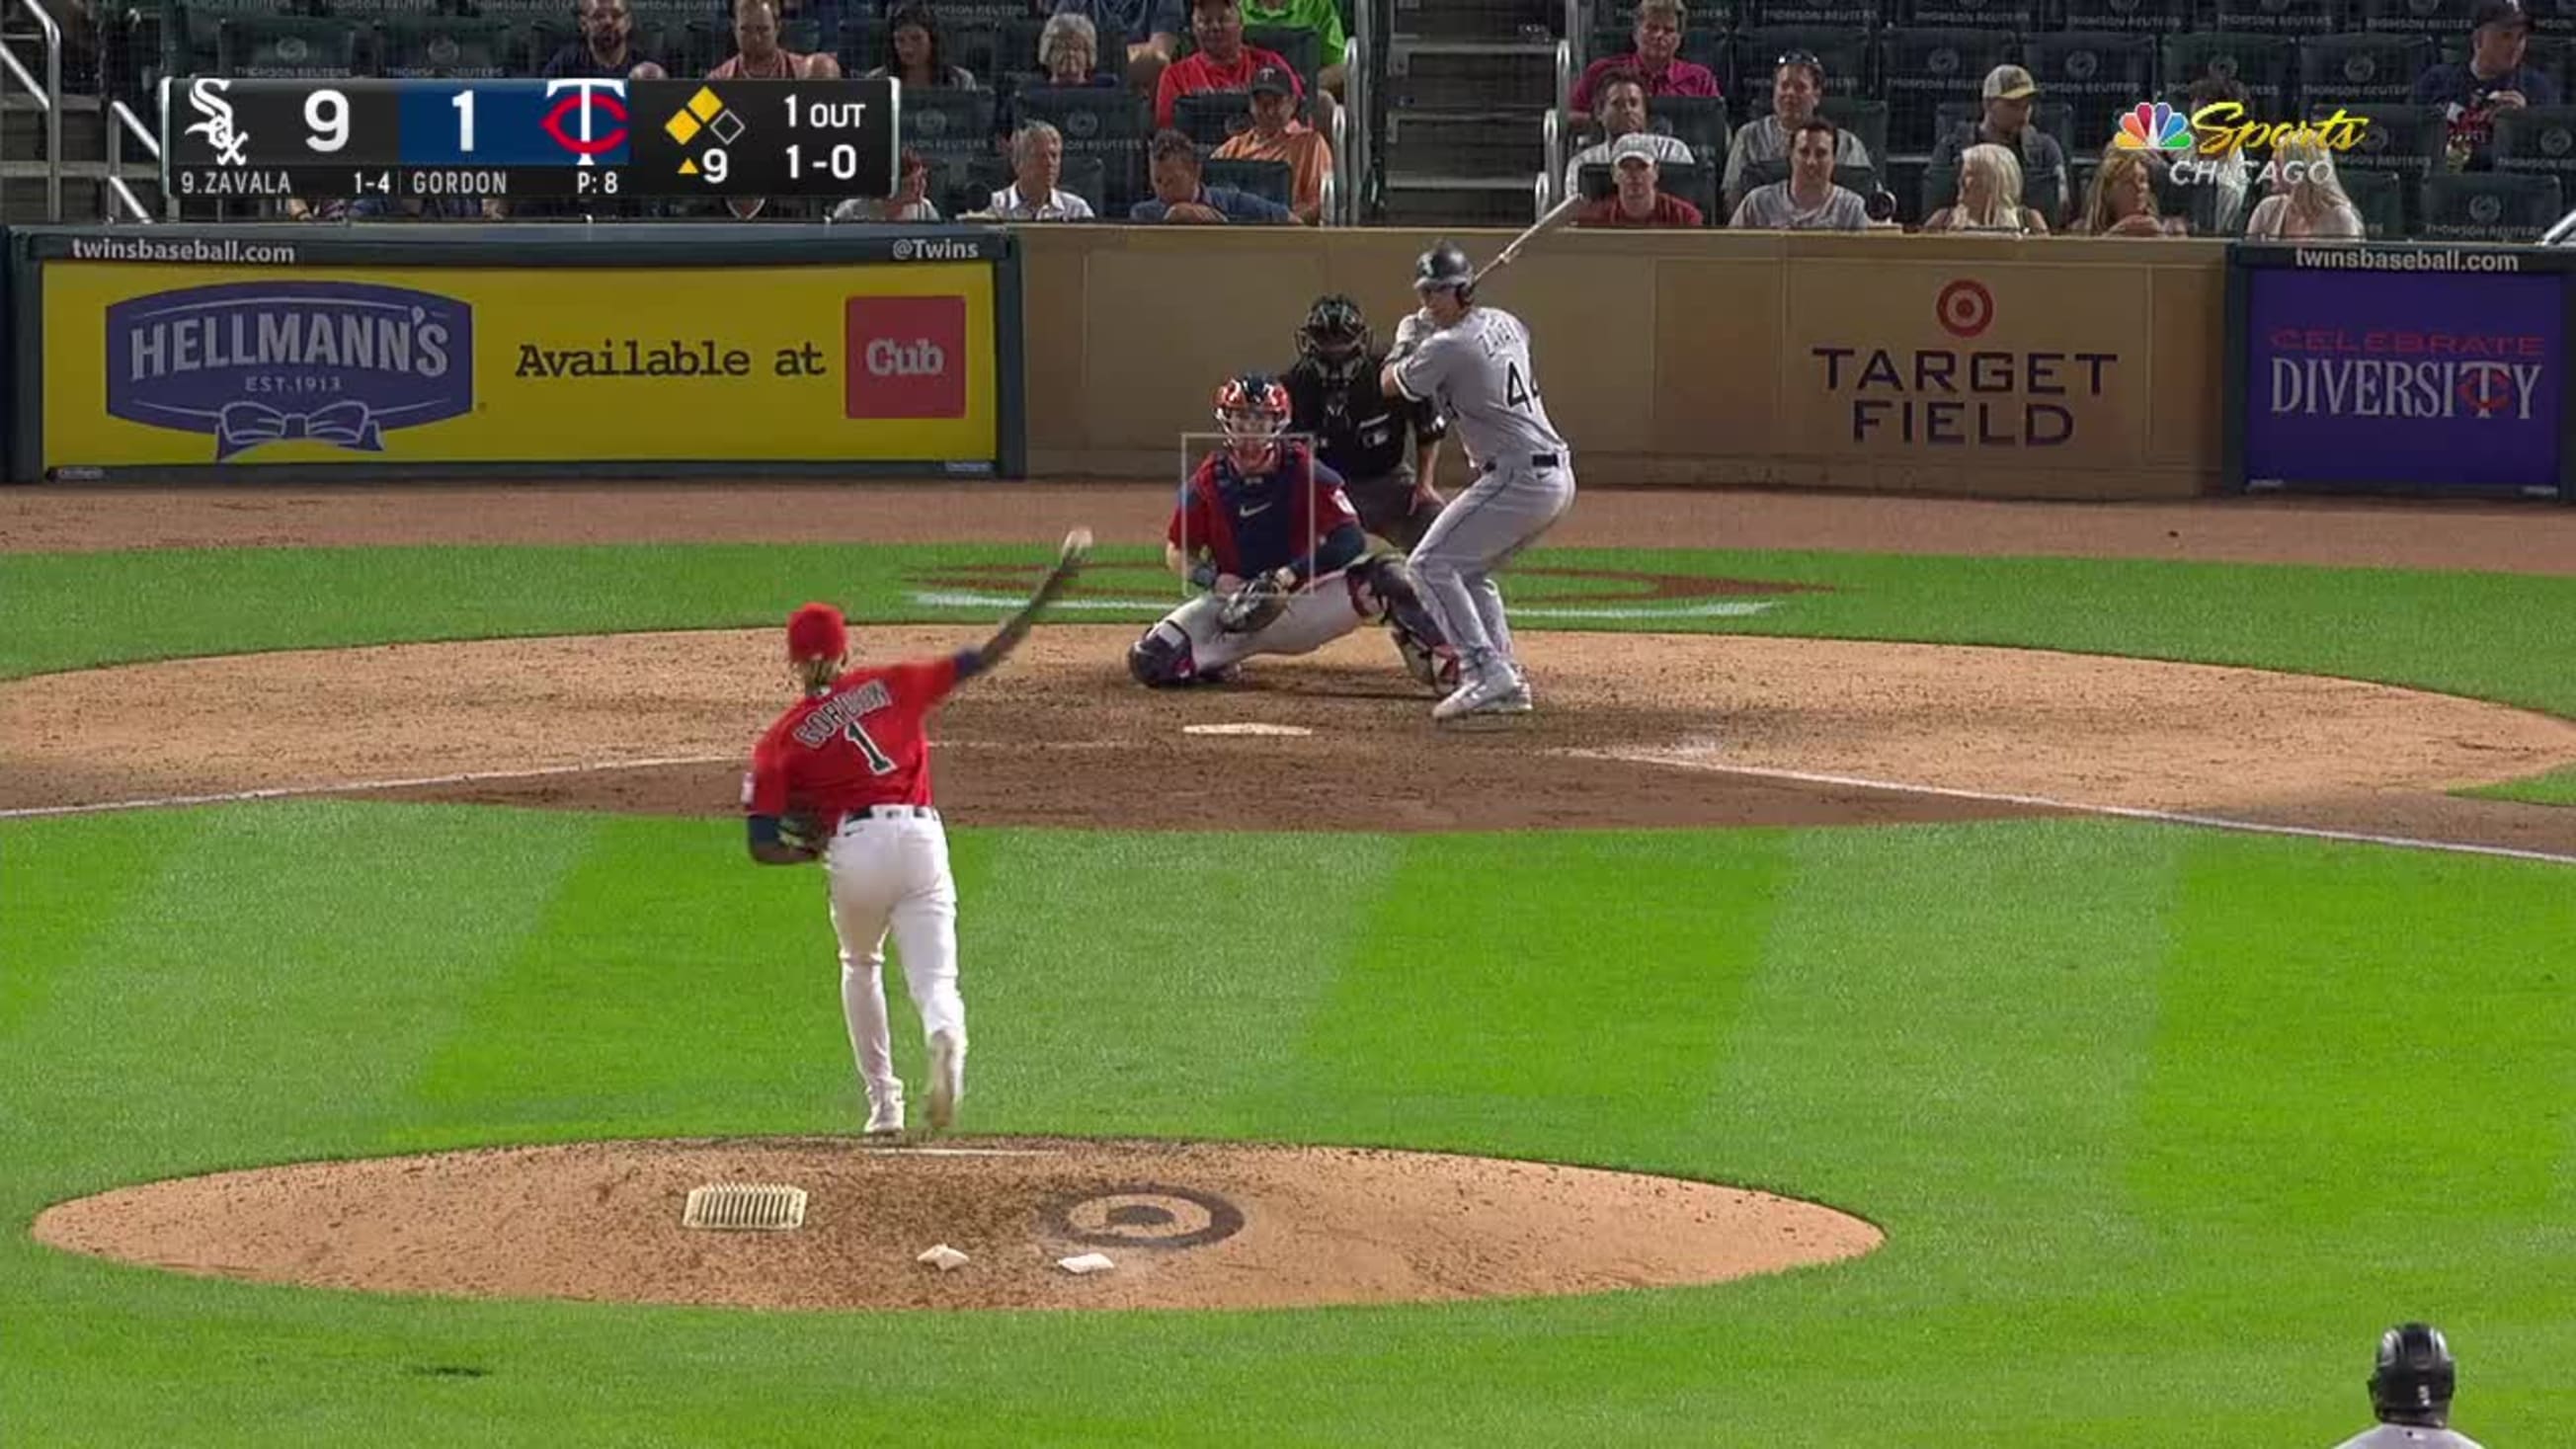 After porching his first (320 ft), Seby Zavala crushes his second home run  of the game (435 ft) to put the White Sox up 3-0 : r/baseball